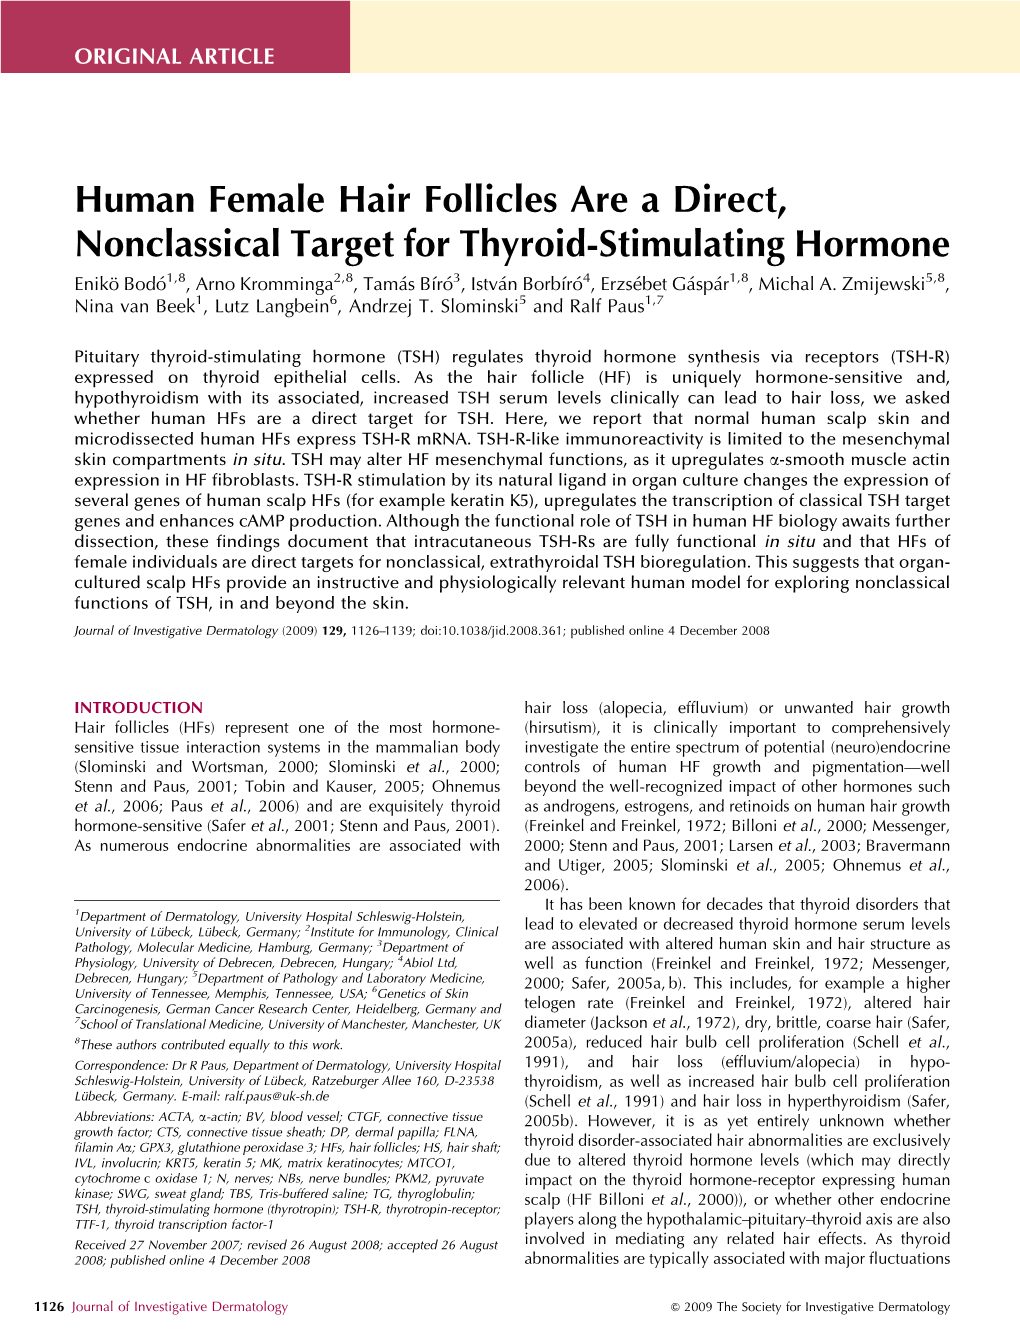 Human Female Hair Follicles Are a Direct, Nonclassical Target For